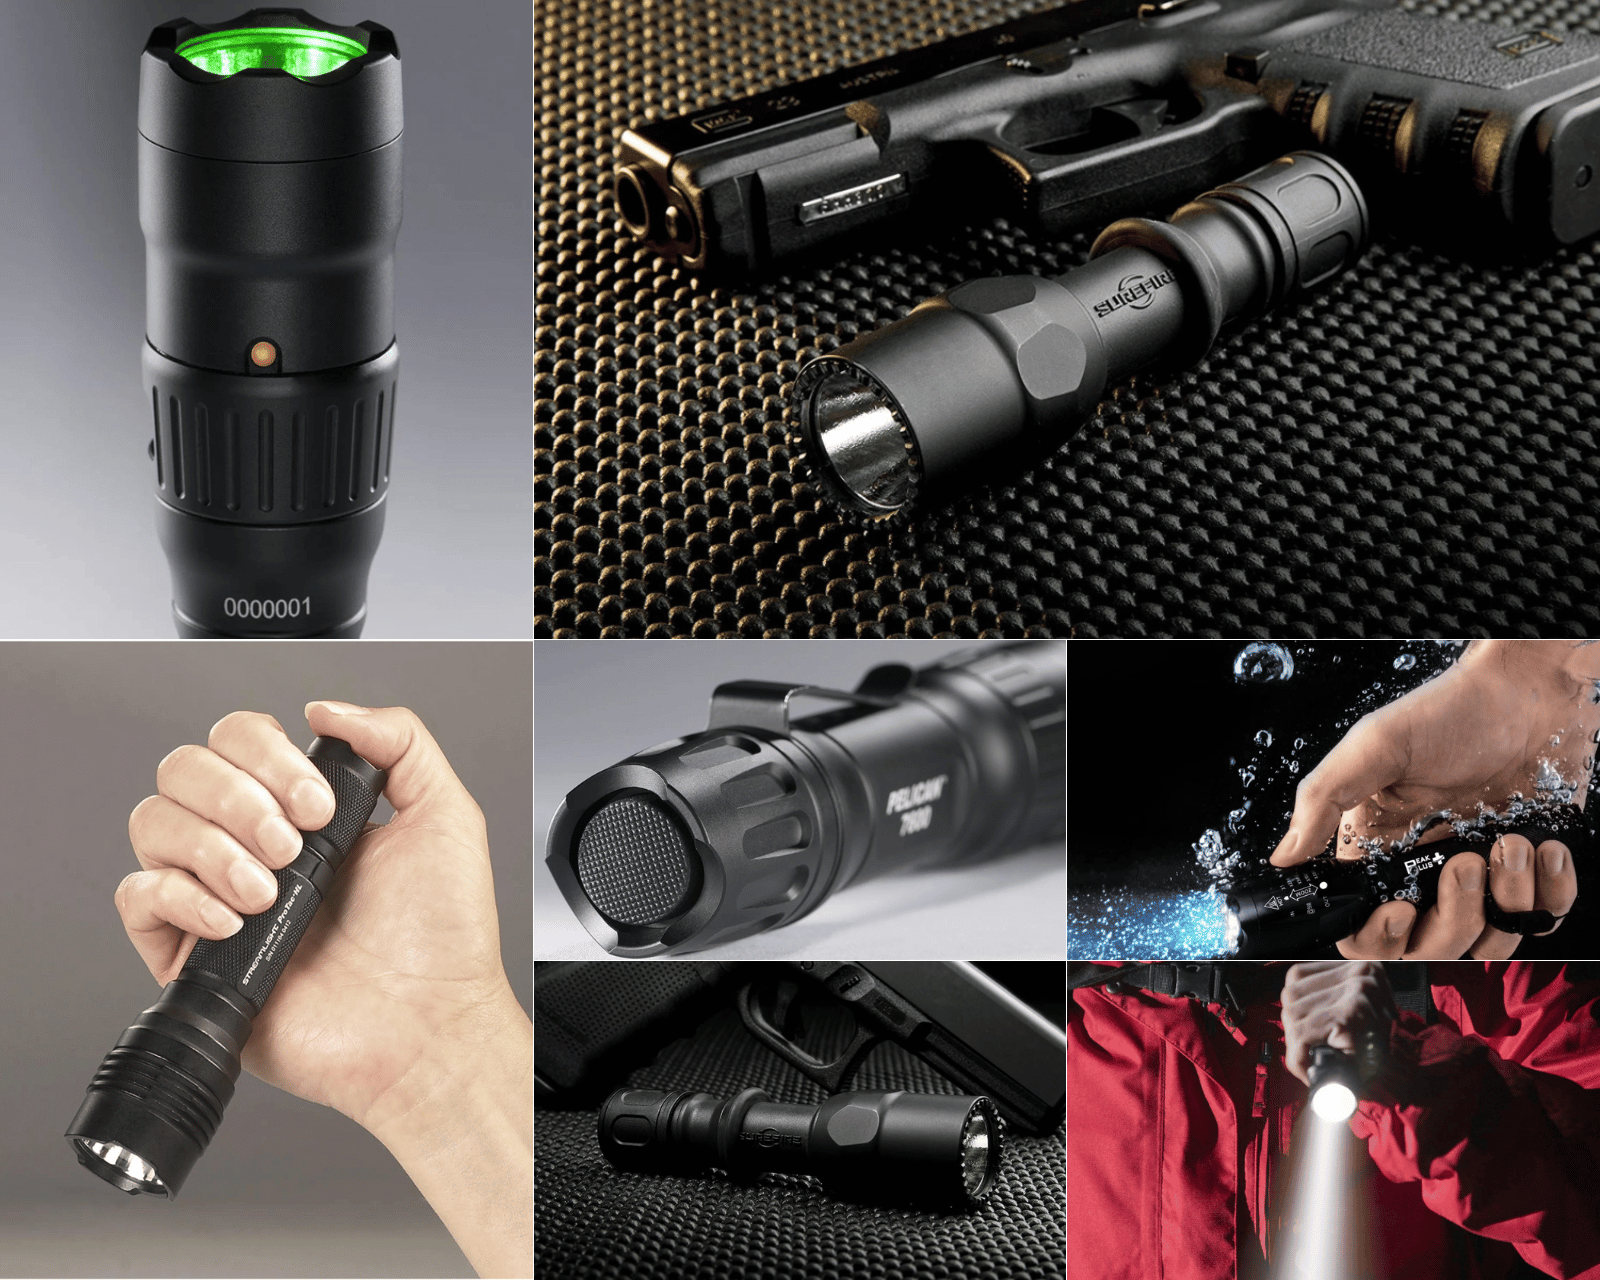 Seven pictures of tactical flashlights in use, underwater, with guns, and feature details